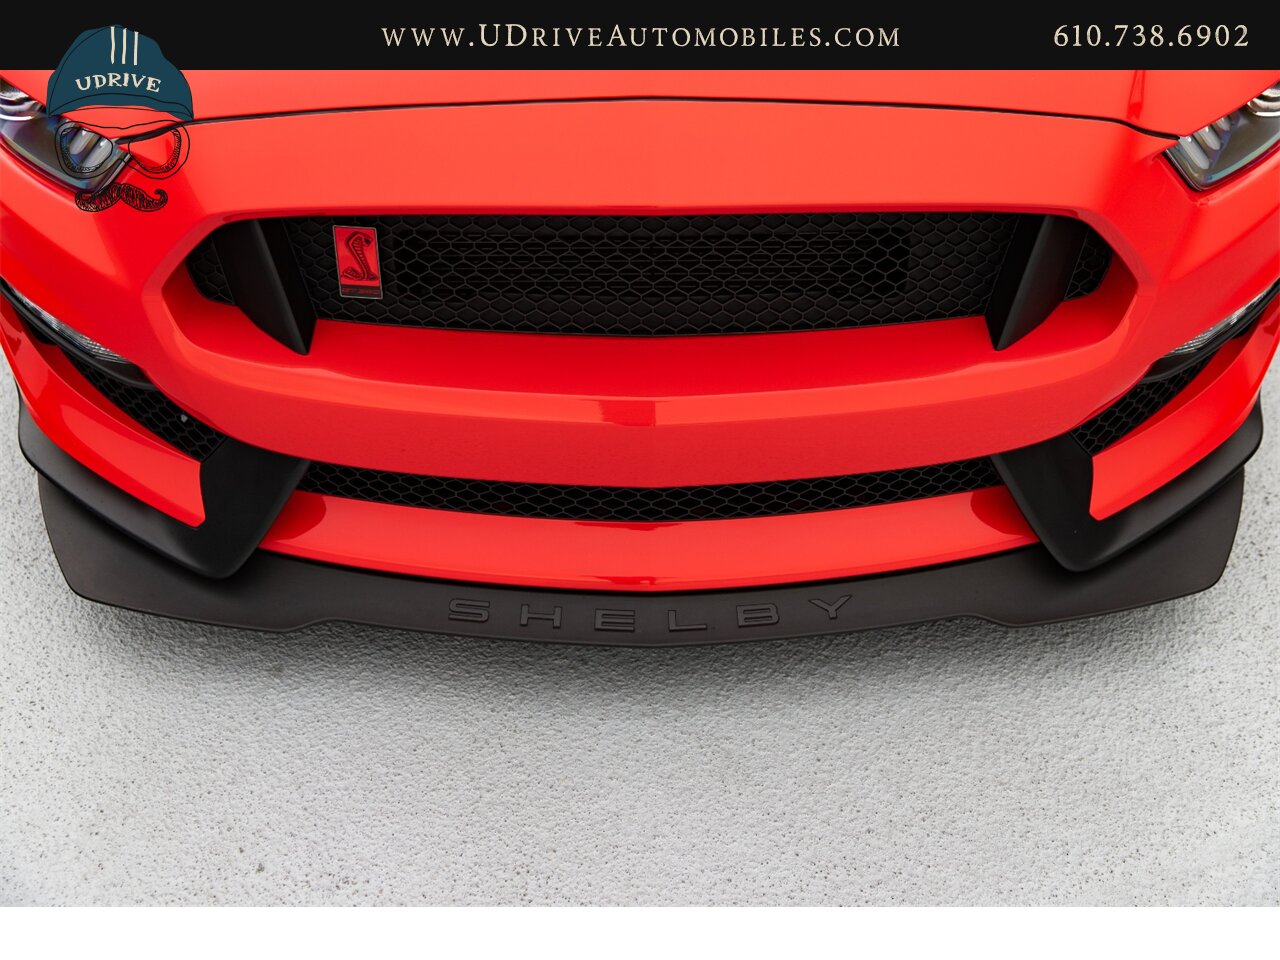 2016 Ford Mustang Shelby GT350R 3k Miles Electronics Pkg  1 of 32 Race Red Produced for USA As New - Photo 16 - West Chester, PA 19382